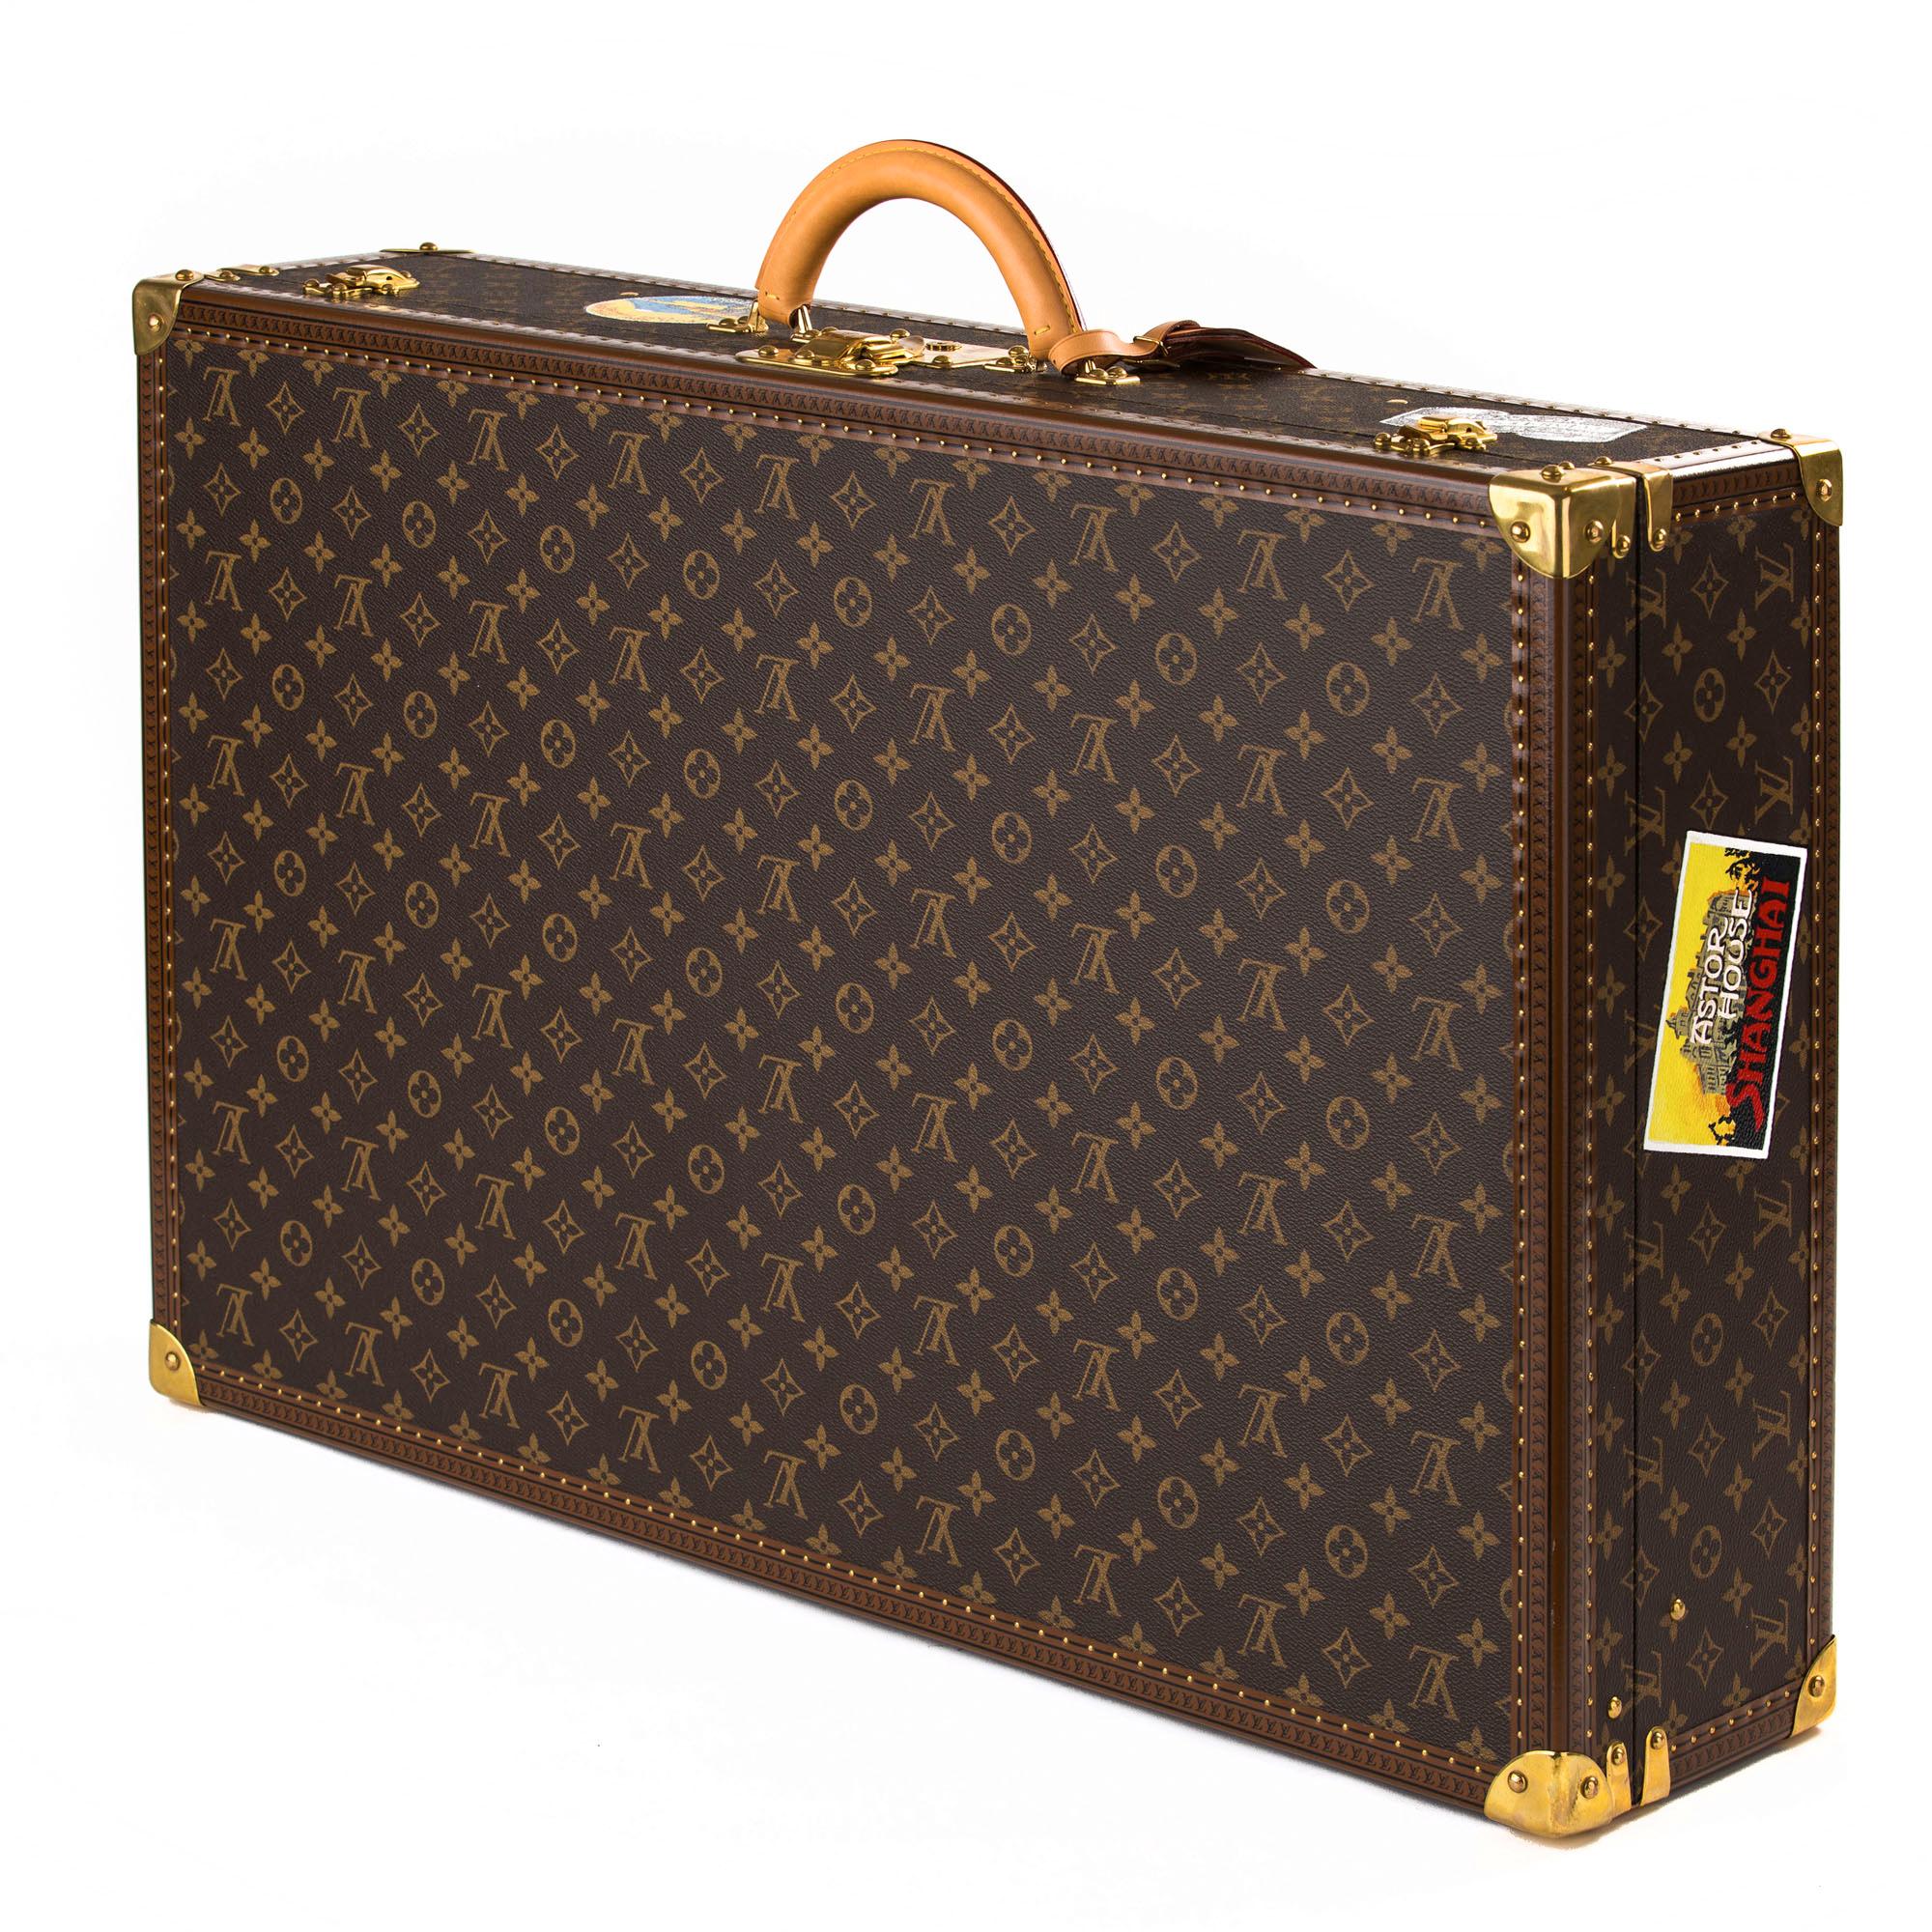 Louis Vuitton Bisten suitcase .

Exclusively painted for Palmer & Penn in Beverley Hills.
This is a one off item.
Beautifully decorated with travel stickers showcasing leading hotels in the world.
 